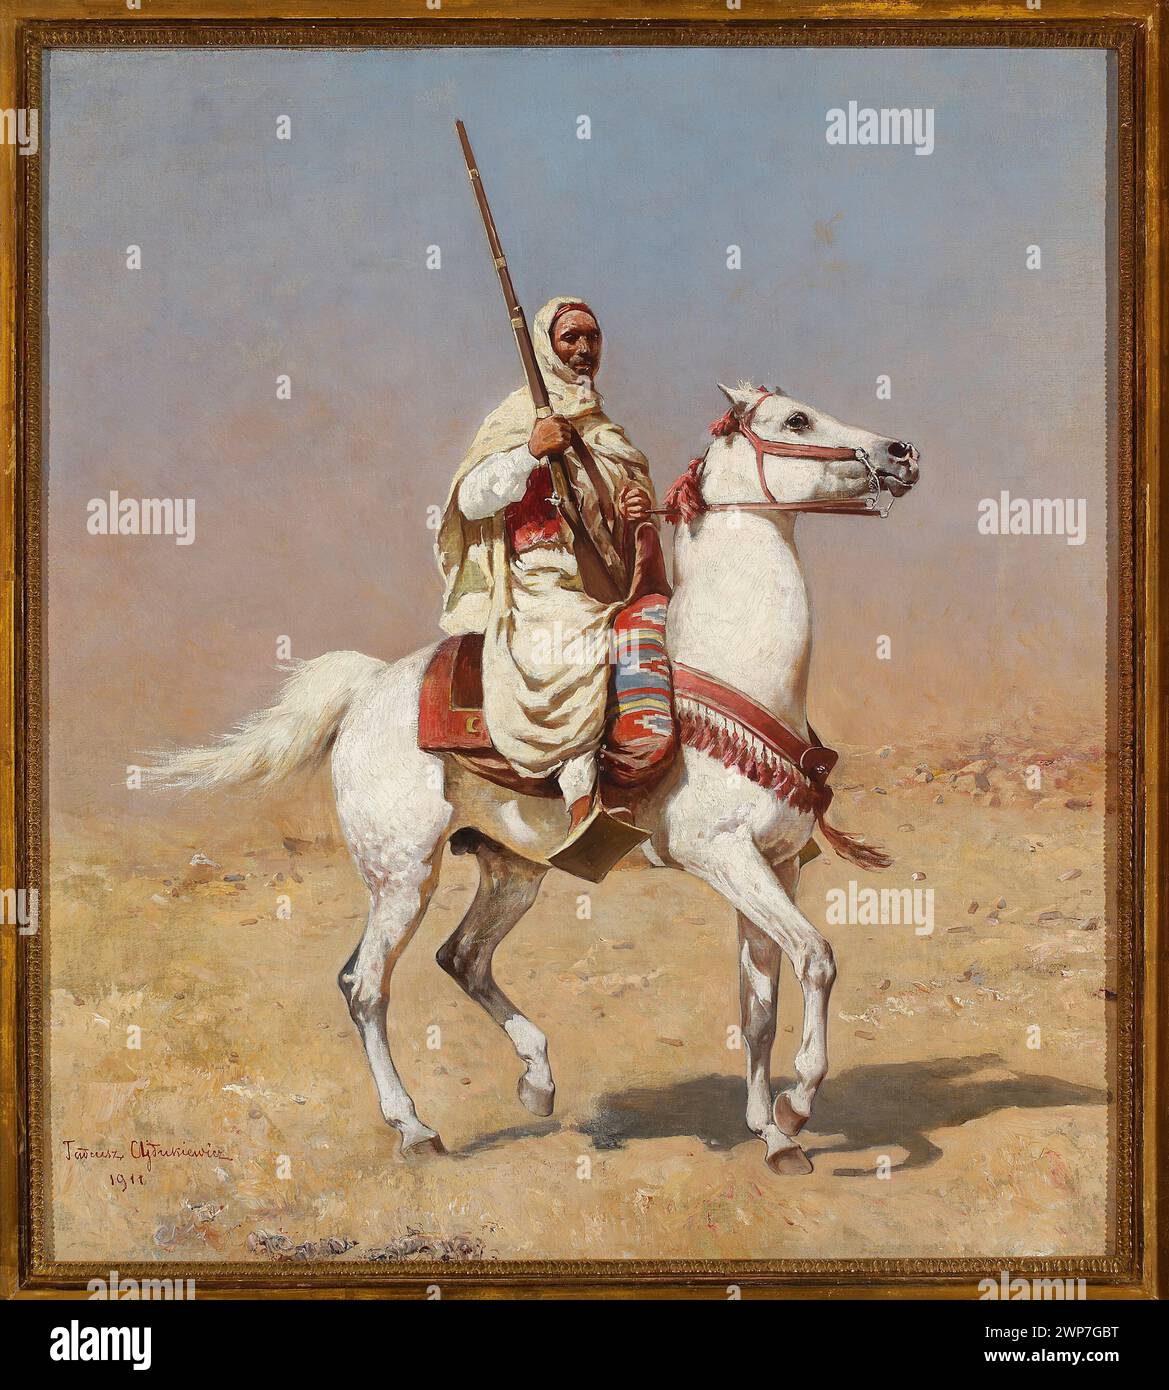 Arab on a gray horse; Ajdukiewicz, Tadeusz (1851-1916); 1911 (1911-00-00-1911-00-00);Arabs, Young Poland (Styl), Orient, Partage Plus, Society for the Encouragement of Fine Arts (Warsaw - 1860-1940), Society for the Encouragement of Fine Arts (Warsaw - 1860-1940) - collection, riders, horses, deserts, Arabian costumes, shotguns, harness Stock Photo